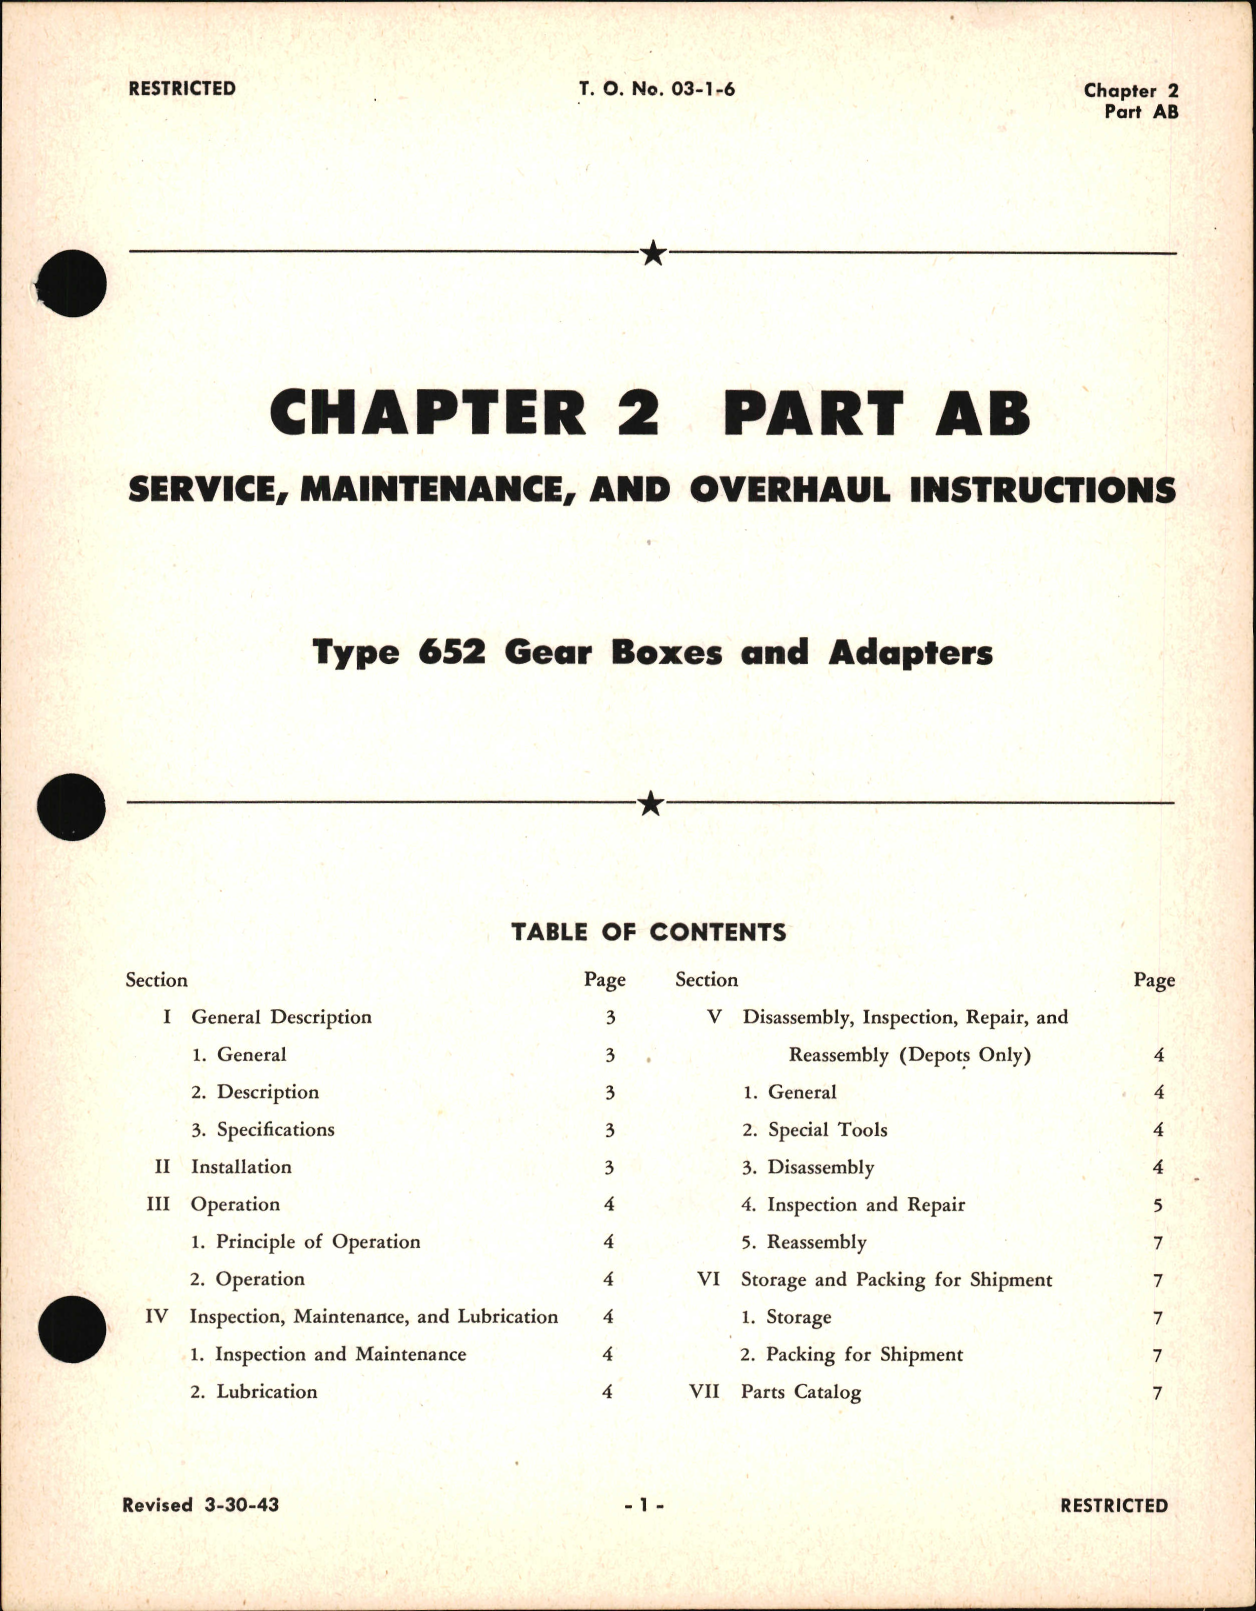 Sample page 1 from AirCorps Library document: Service, Maintenance and Overhaul Instructions for Gear Boxes & Adapters Type 652